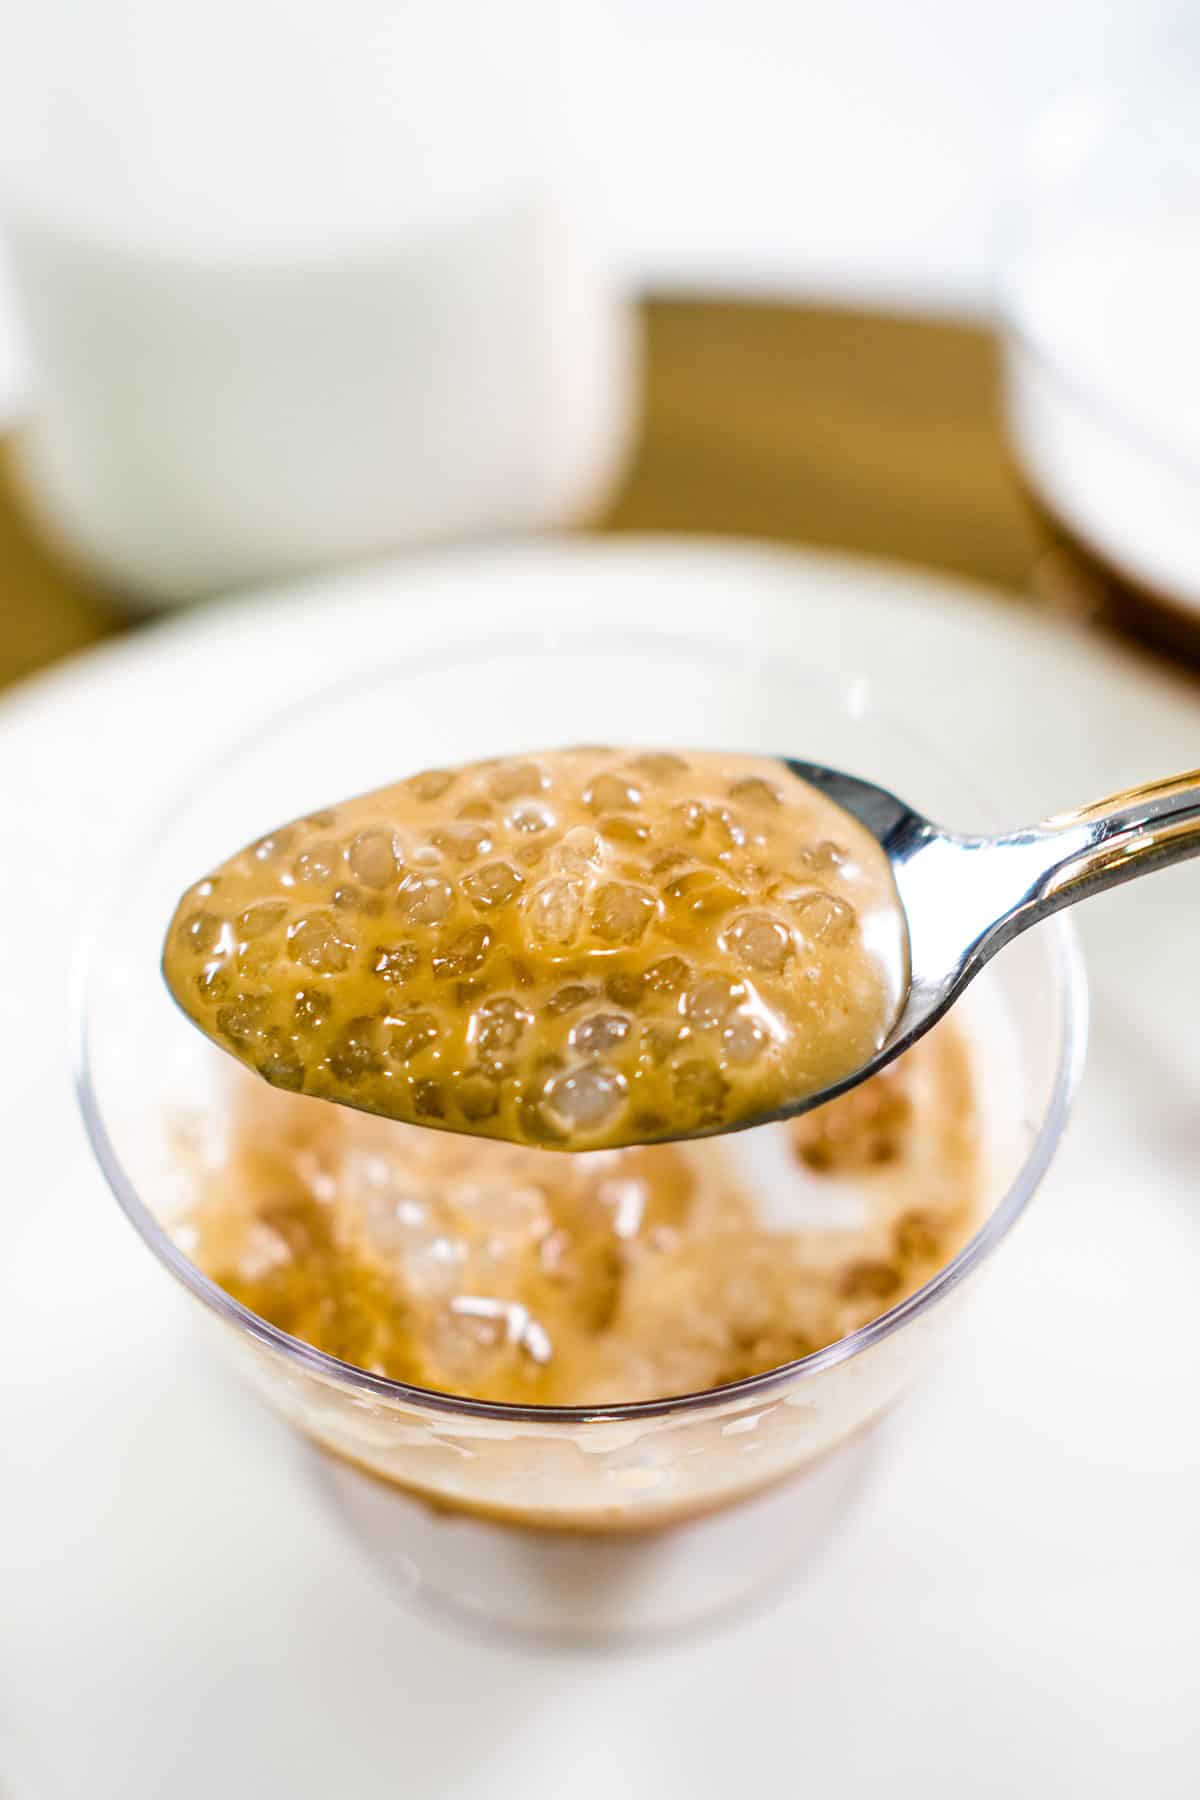 A spoon of sago pudding in coconut milk and palm sugar syrup.